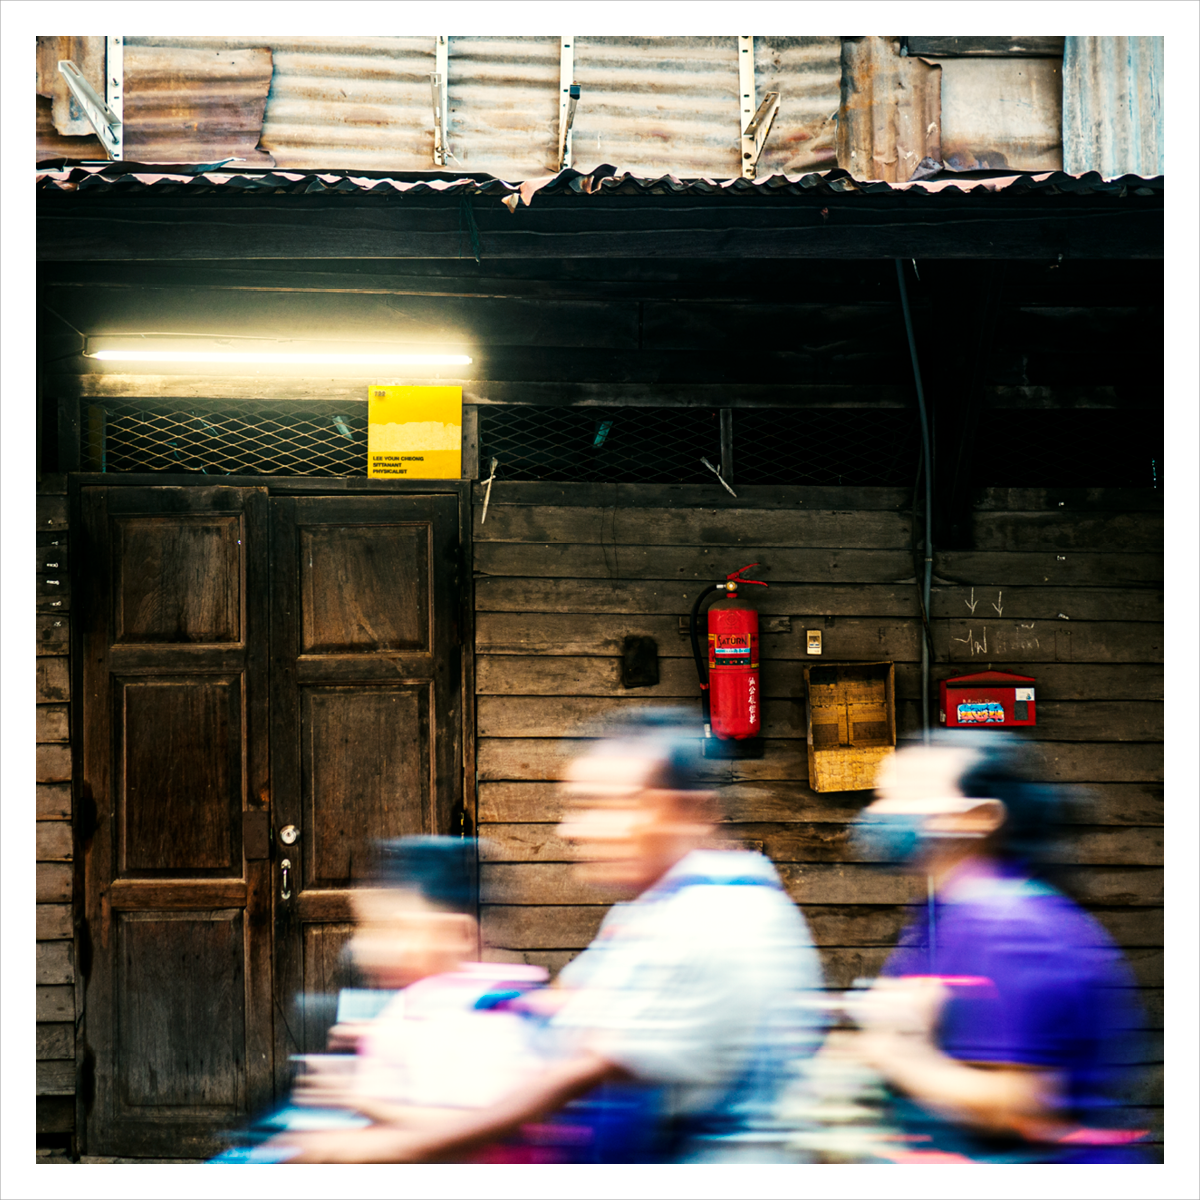 photography of streetlife, holy places and architecture in thailand and burma